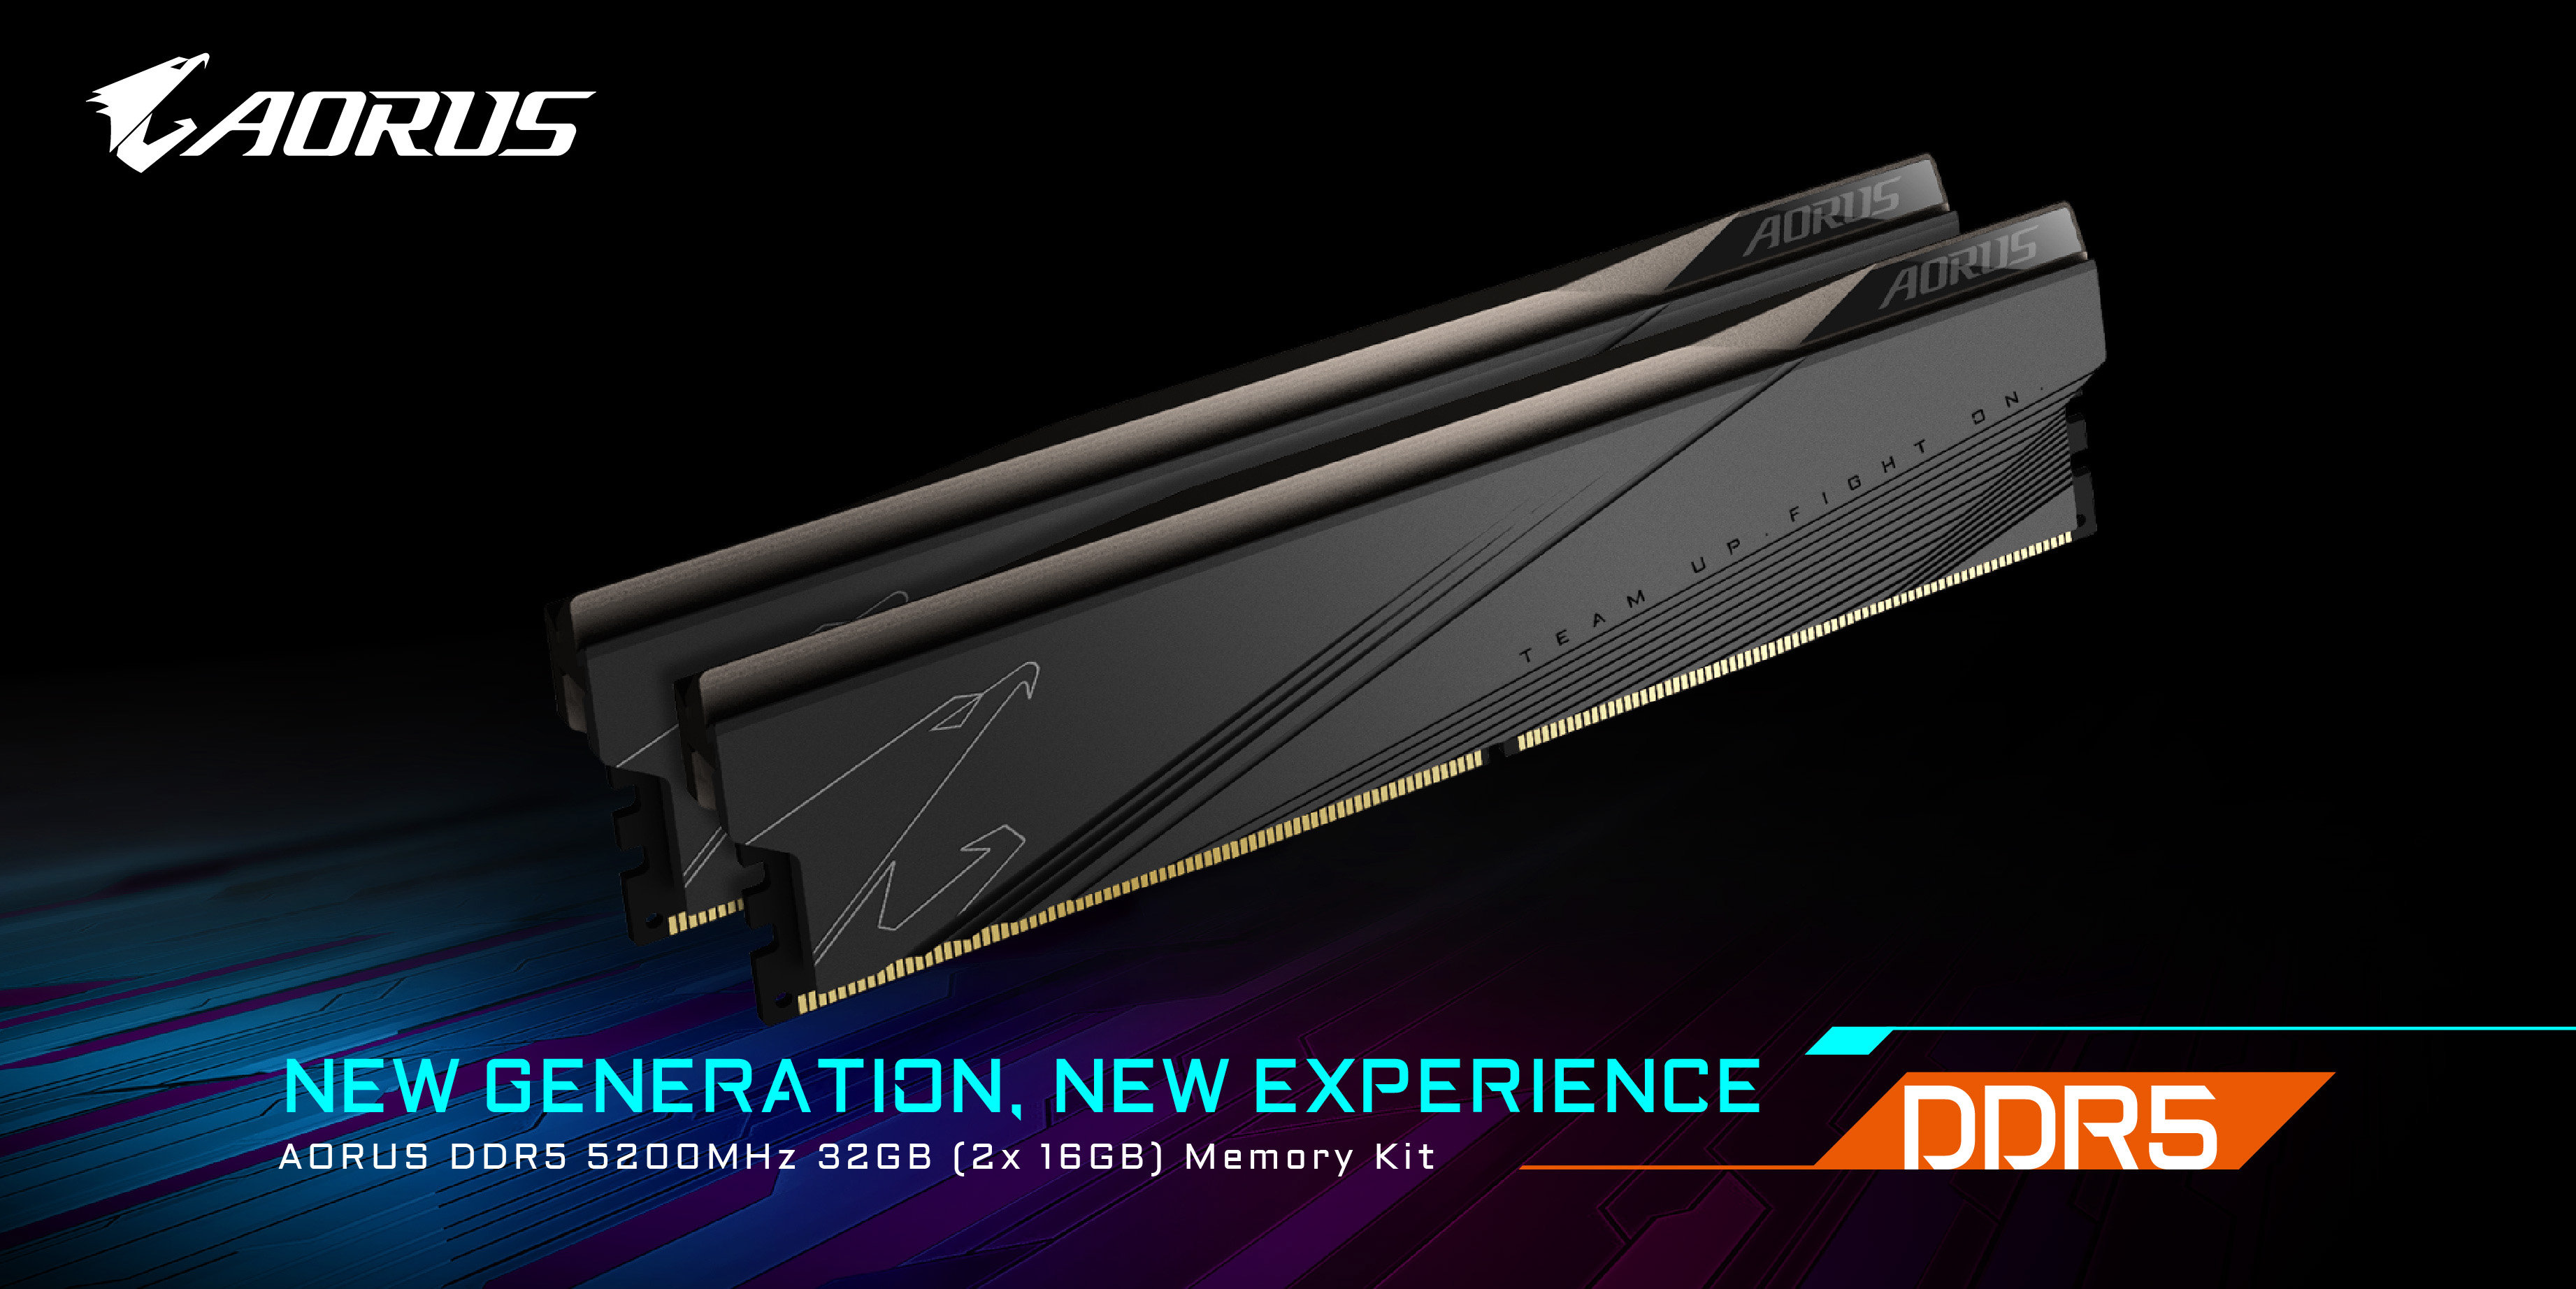 First in the Market! GIGABYTE Releases AORUS DDR5 5200MHz 32GB Memory Kit